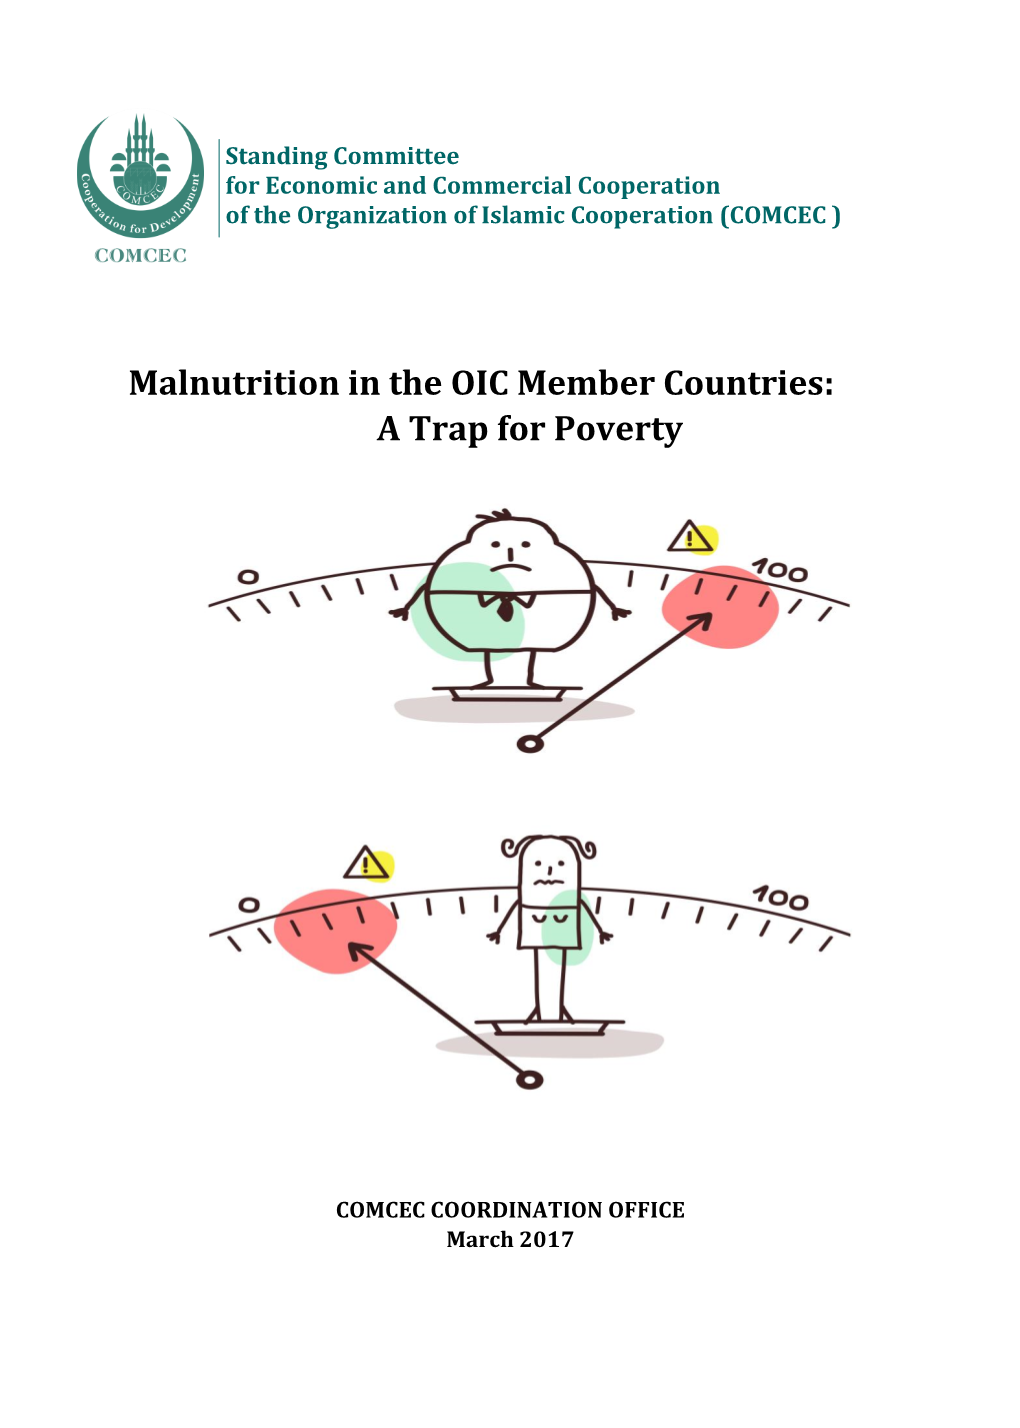 Malnutrition in the OIC Member Countries: a Trap for Poverty